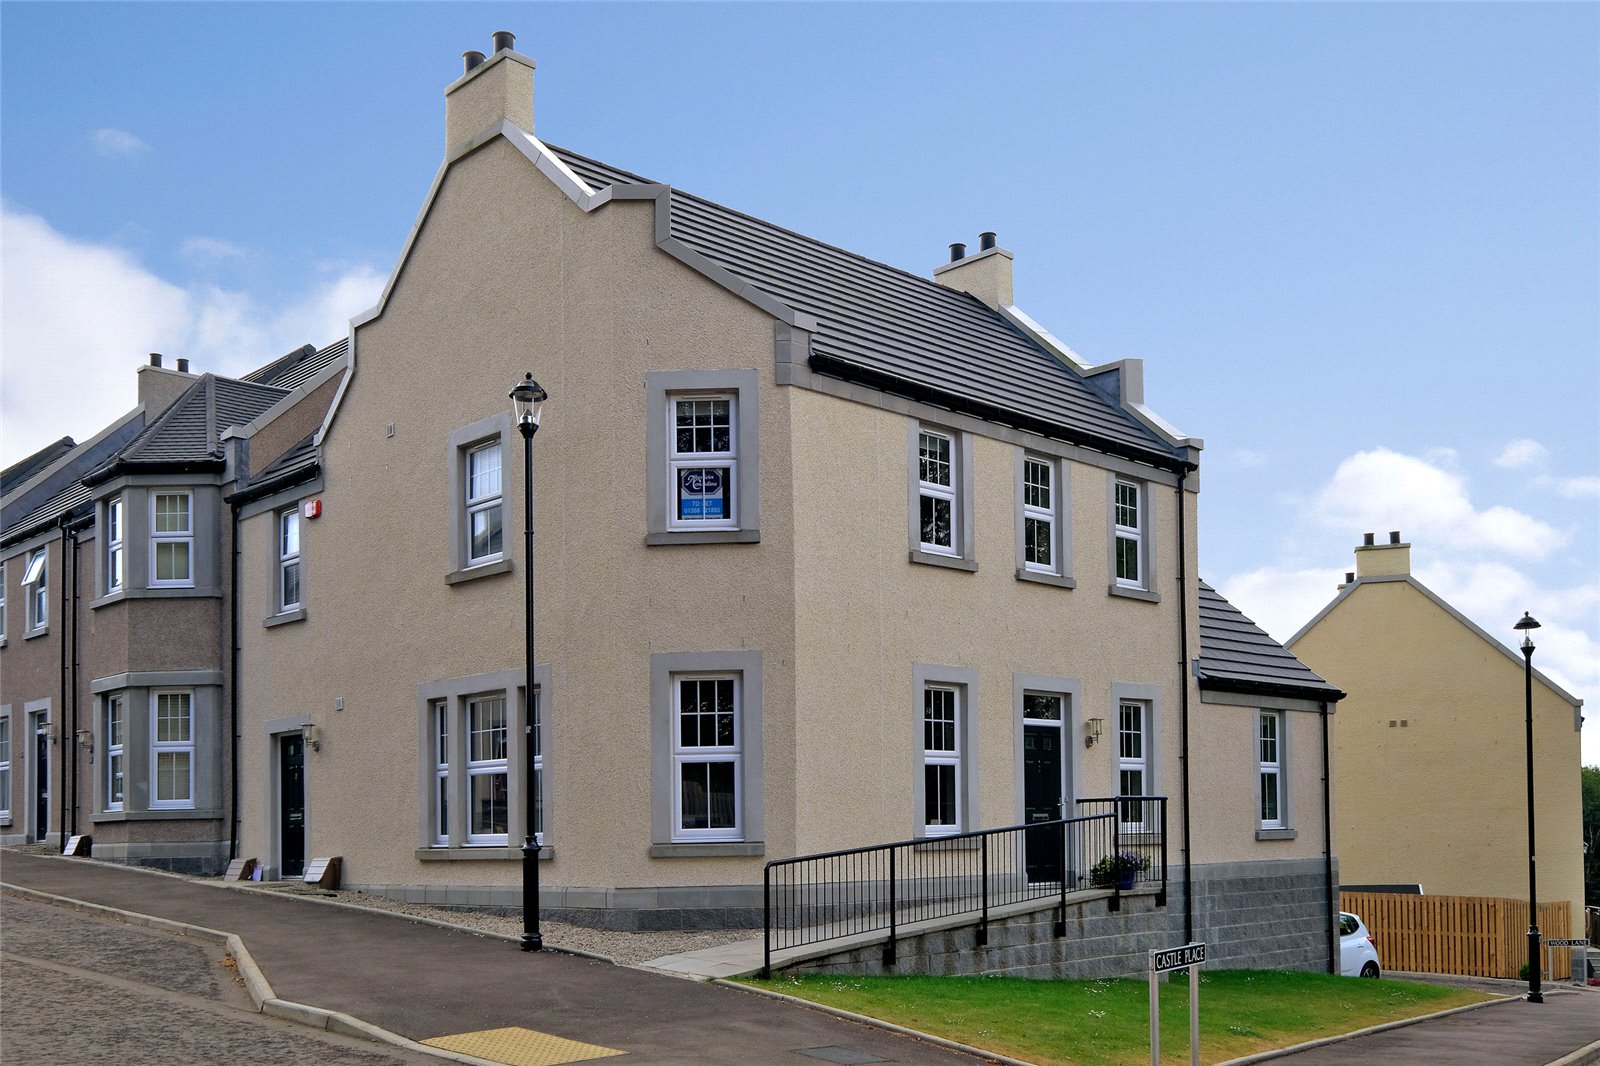 Our latest properties for sale and to let (14th August 2019)